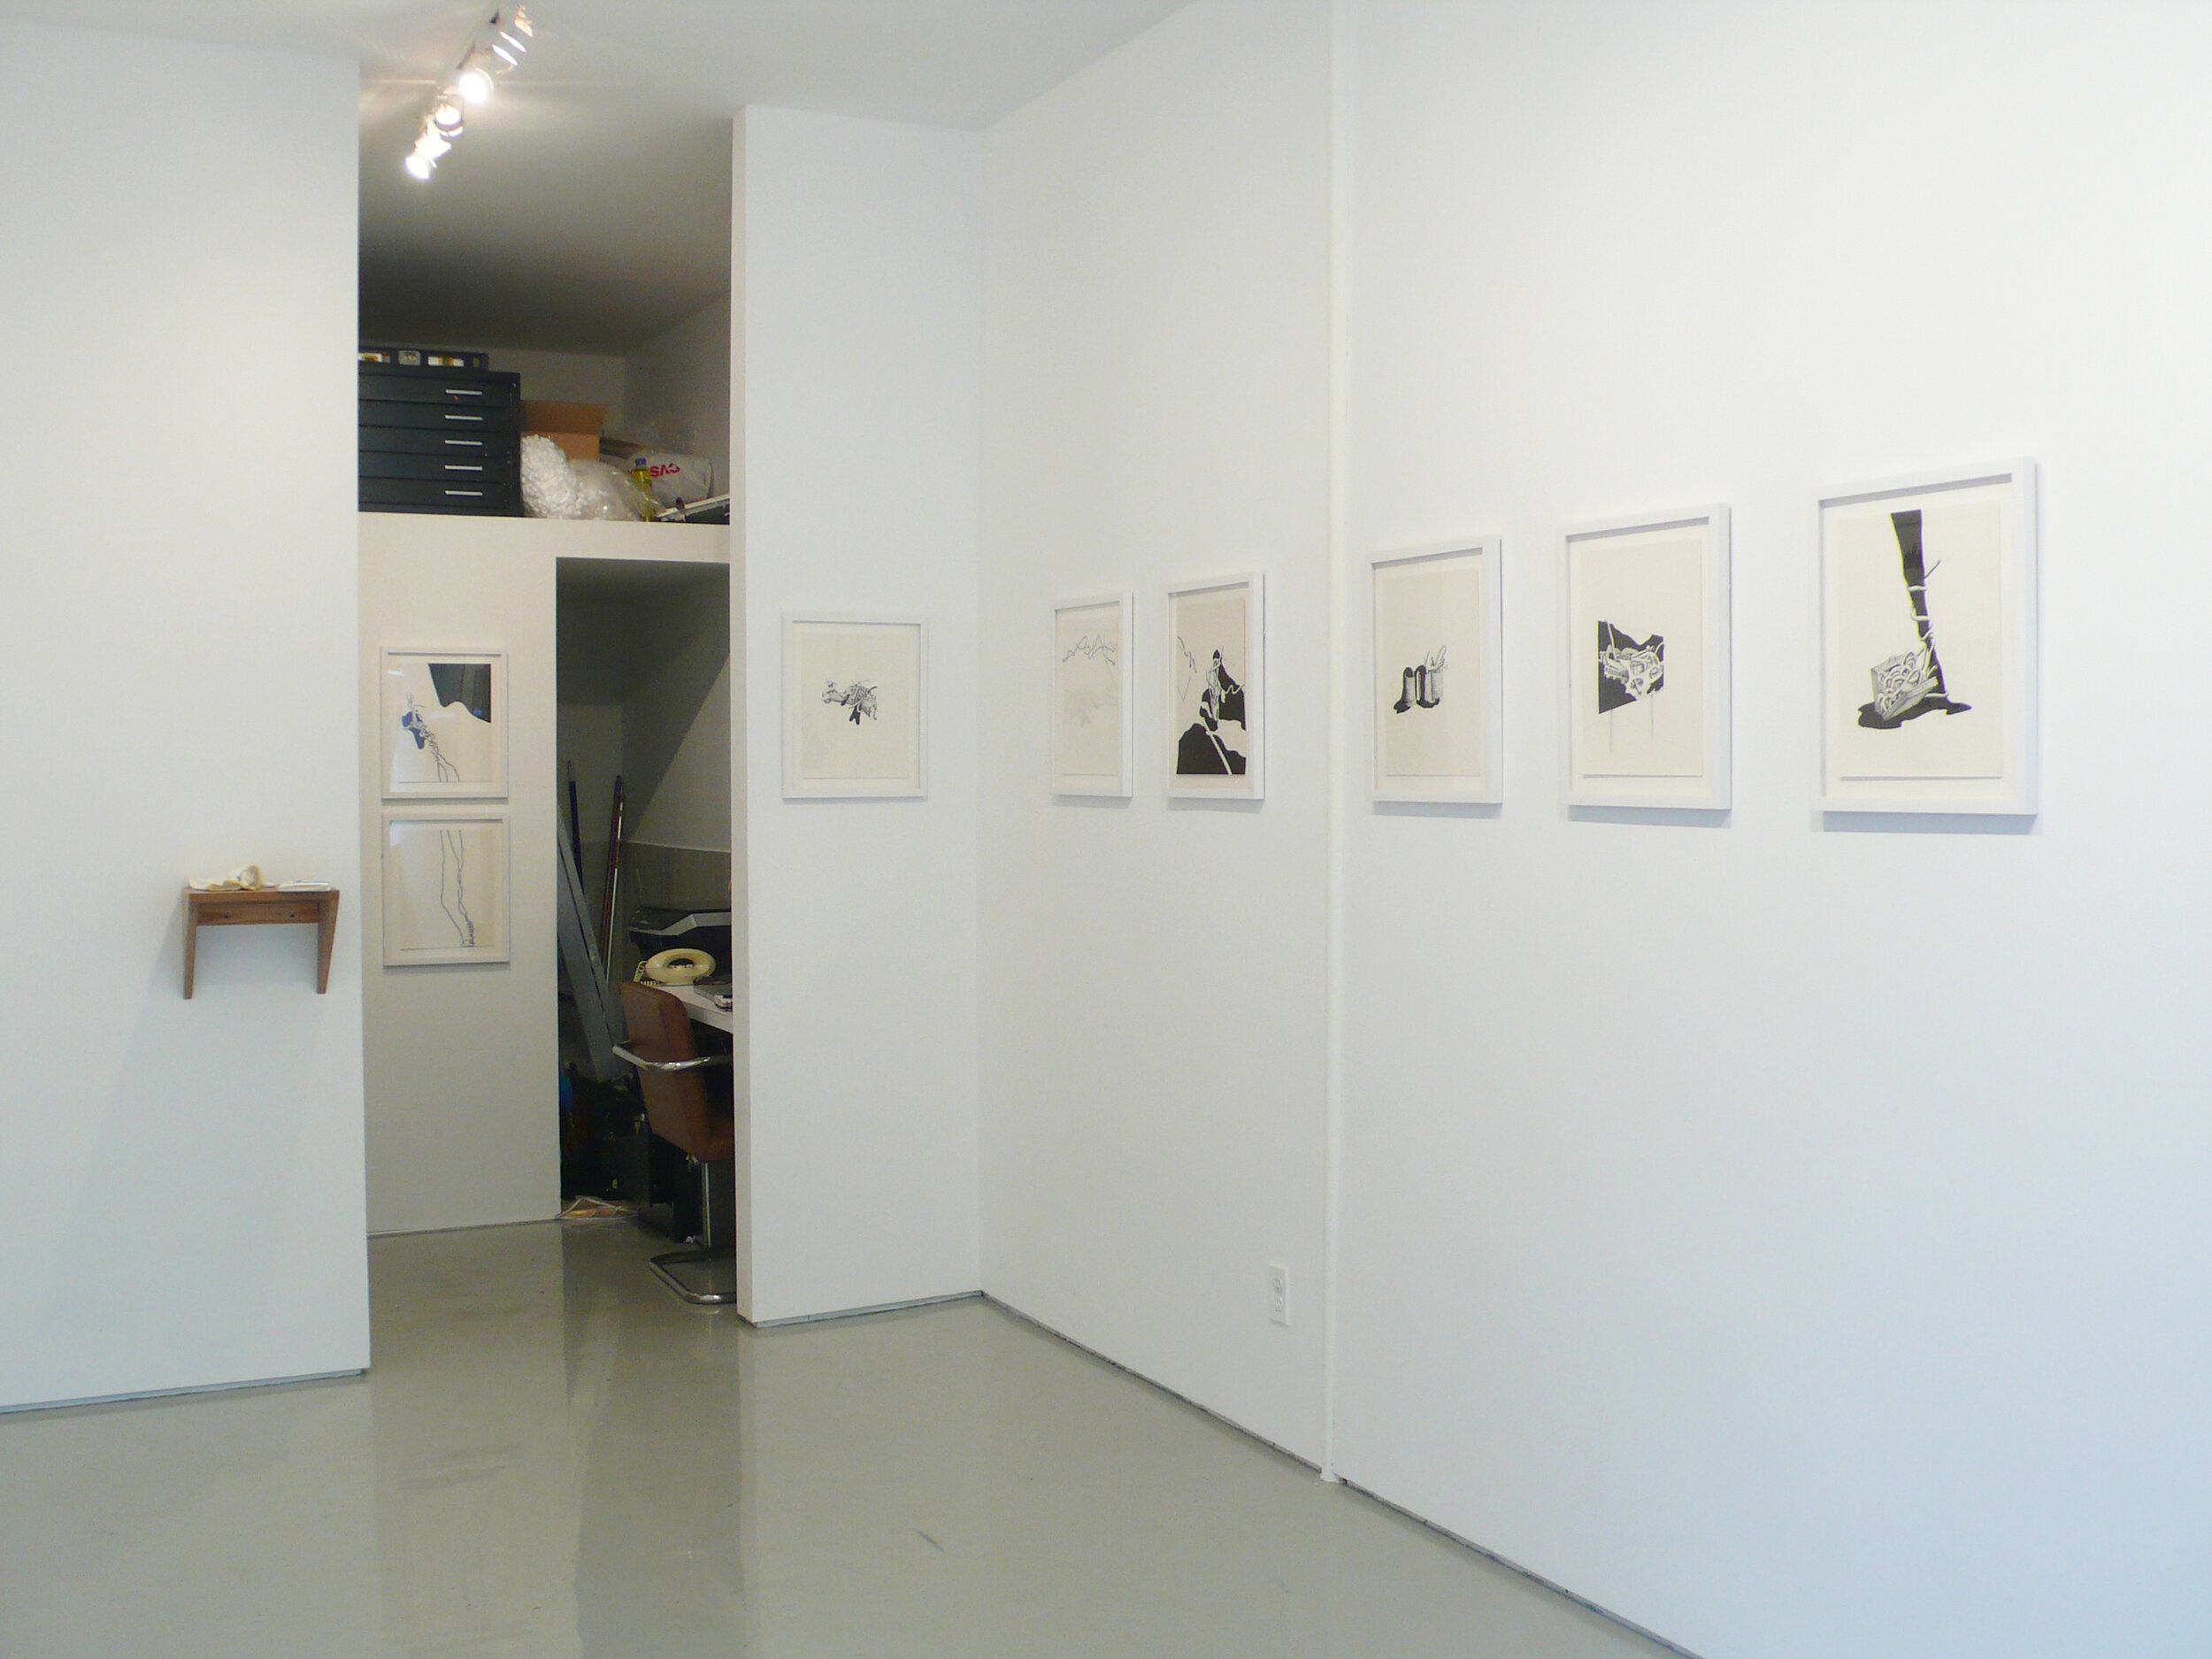 Installation image from the 2007 Catarina Leitão exhibition, THICKET, at Cindy Rucker Gallery, Number 35